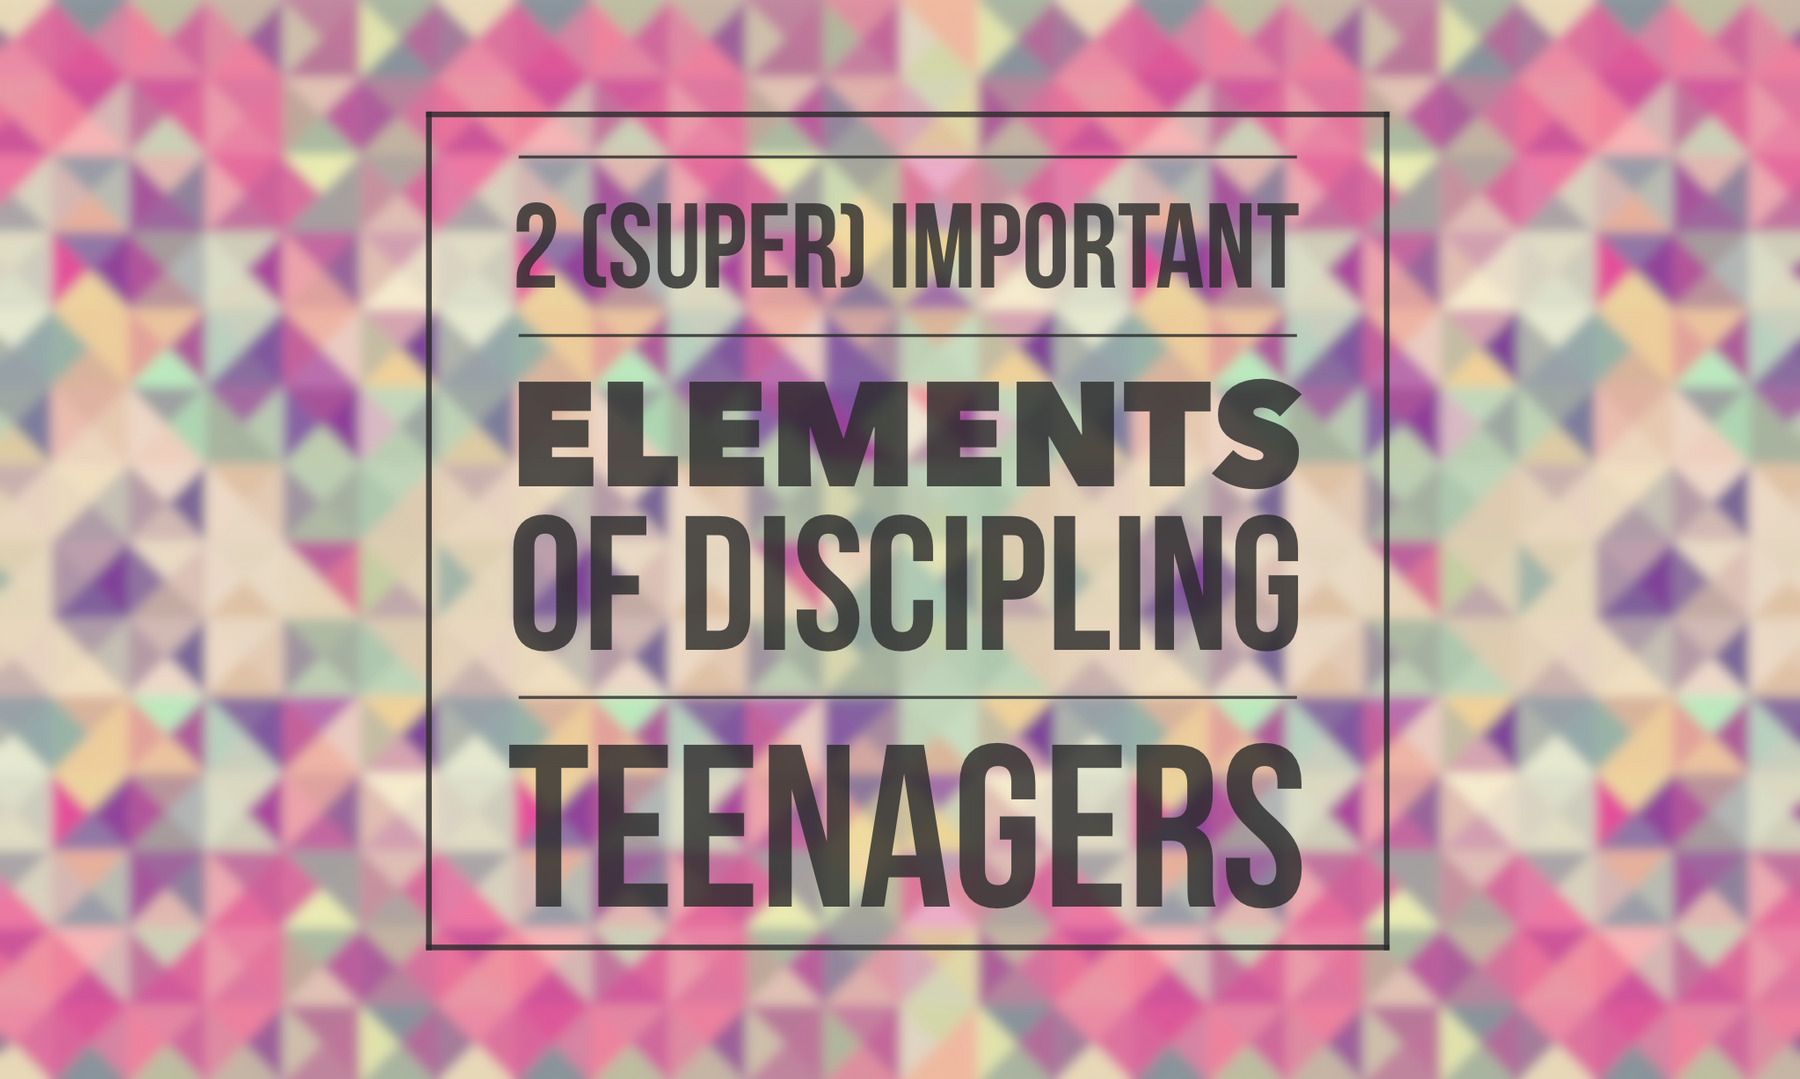 Two (Super) Important Elements of Discipling Teenagers